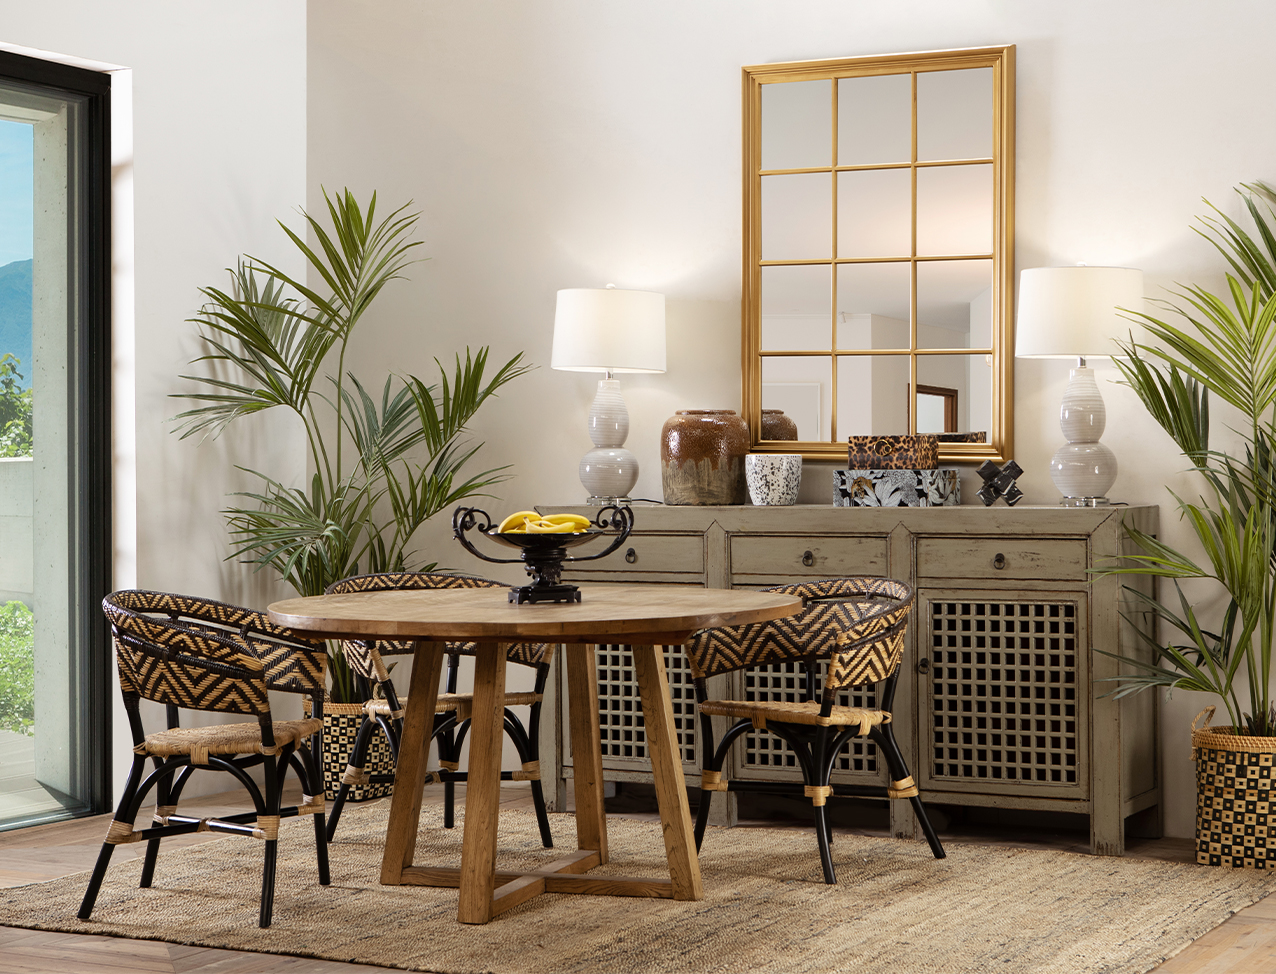 Round wooden dining table in eclectic decor scene with Asian-inspired sideboard and African-inspired pattern rattan dining chairs